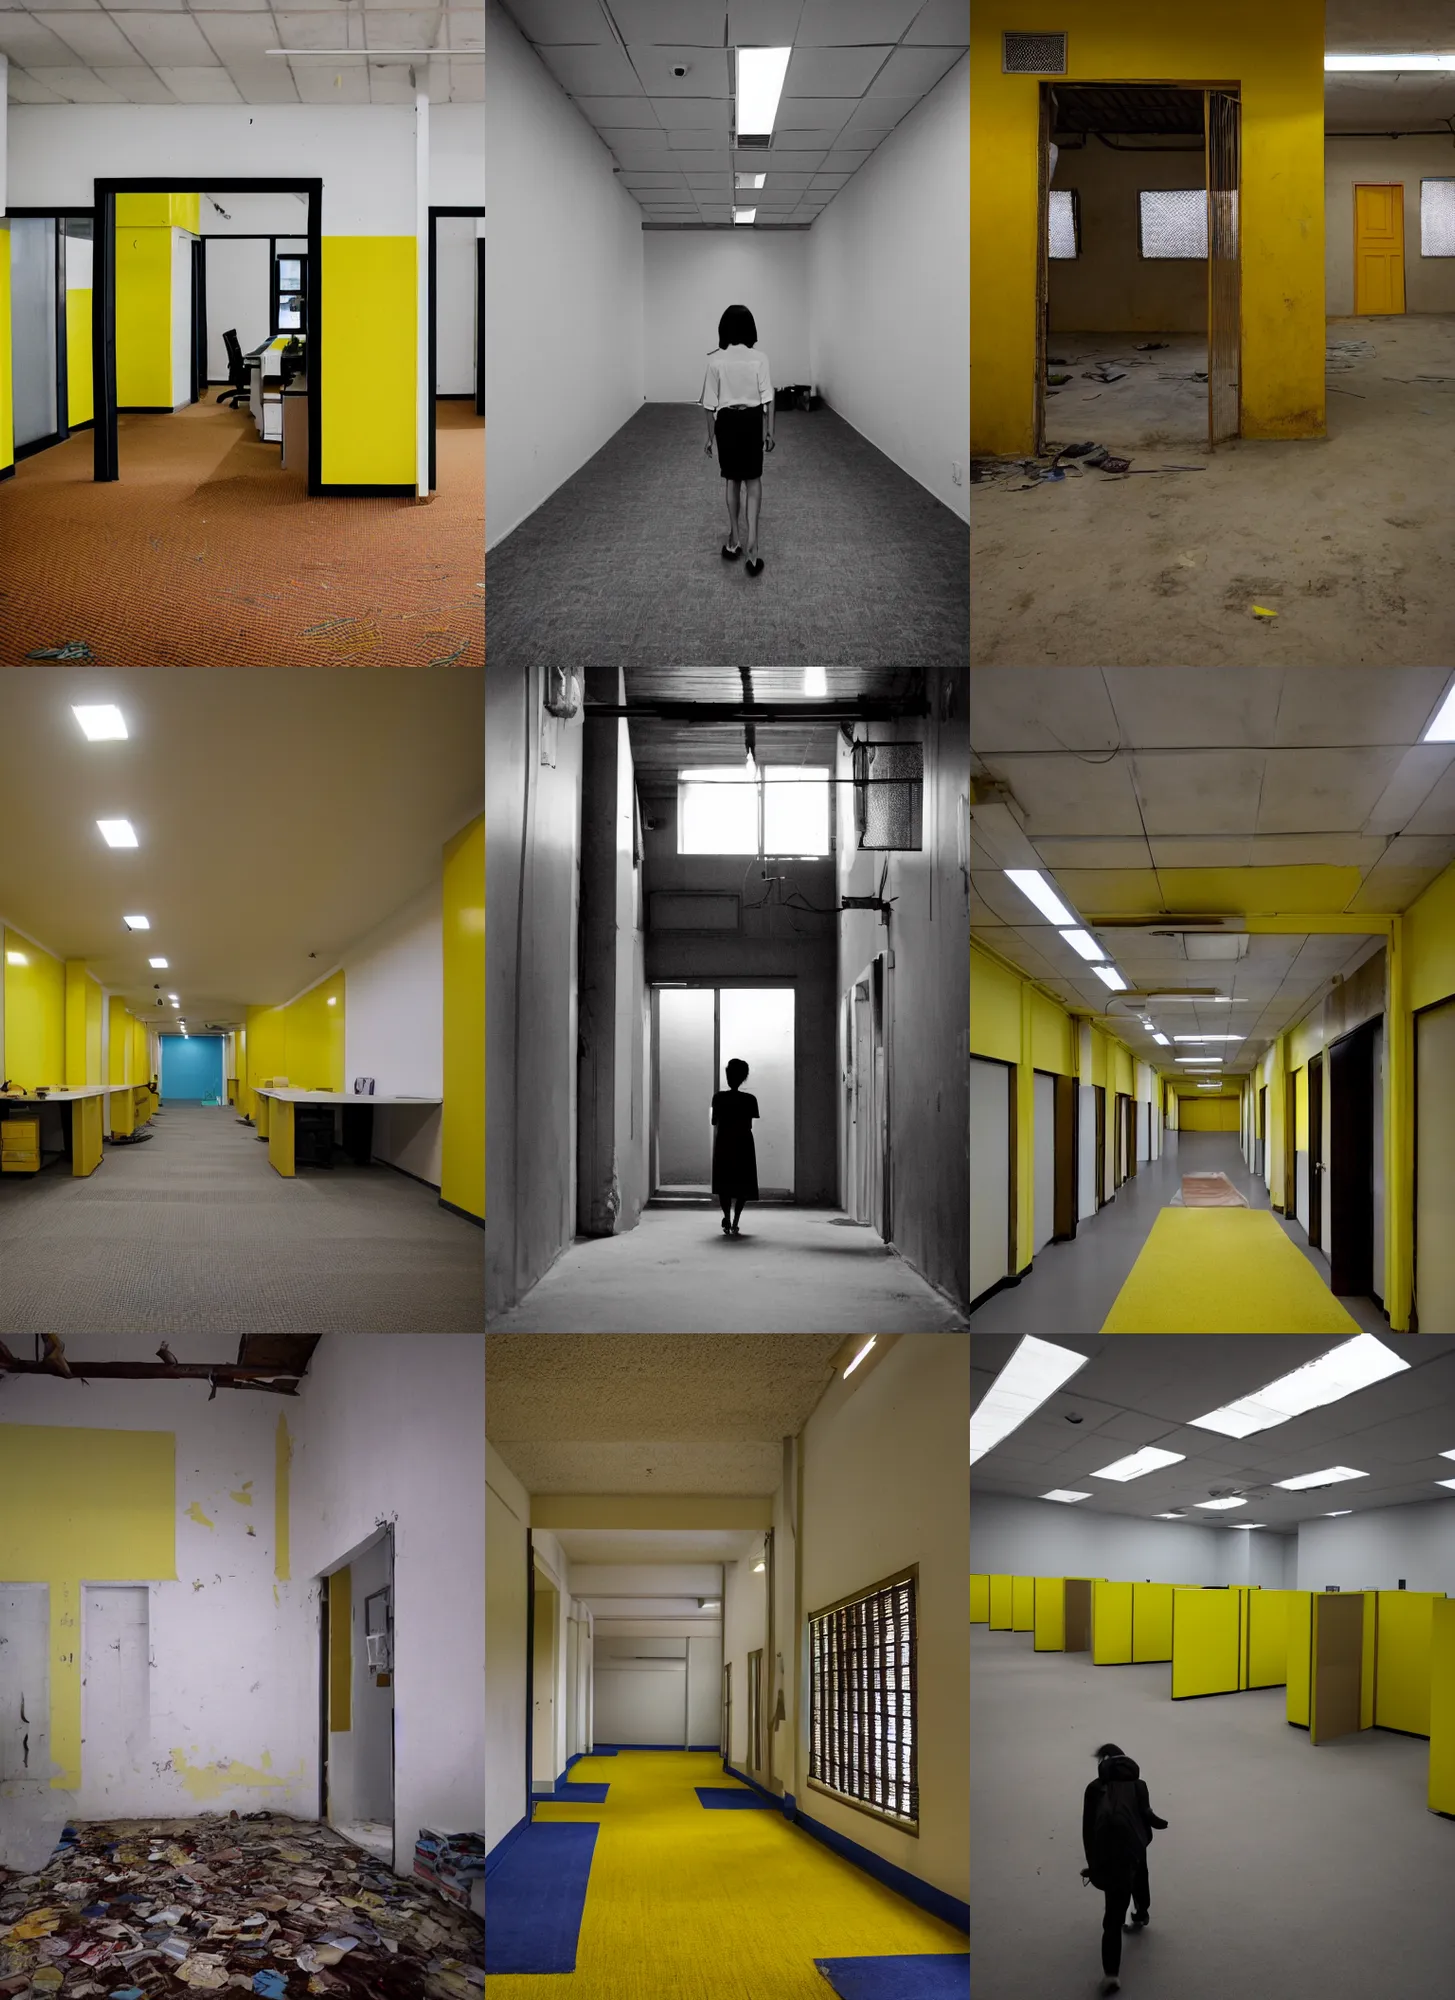 Prompt: Lampião wandering around in the backrooms, an empty, fluorescent lit yellow office with stained walls and carpet, desolate